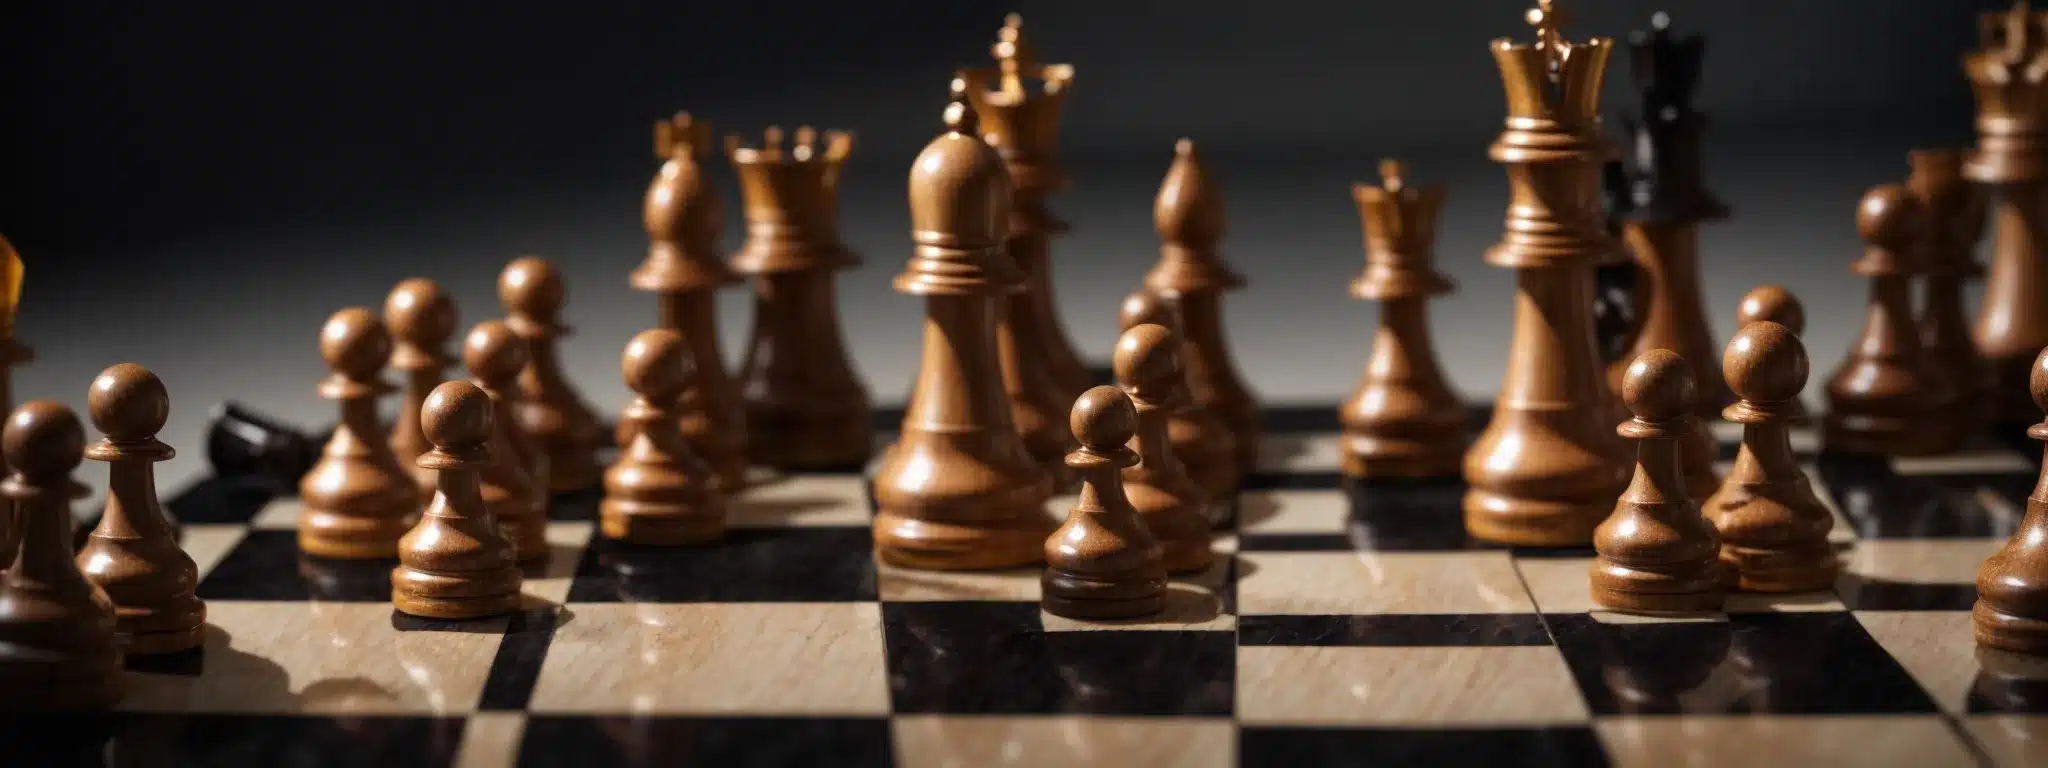 A Majestic Chess Board With Distinctively Carved Pieces Deployed Strategically Stands Ready For A Cerebral Match, Echoing The Silent War Of Market Dominance.